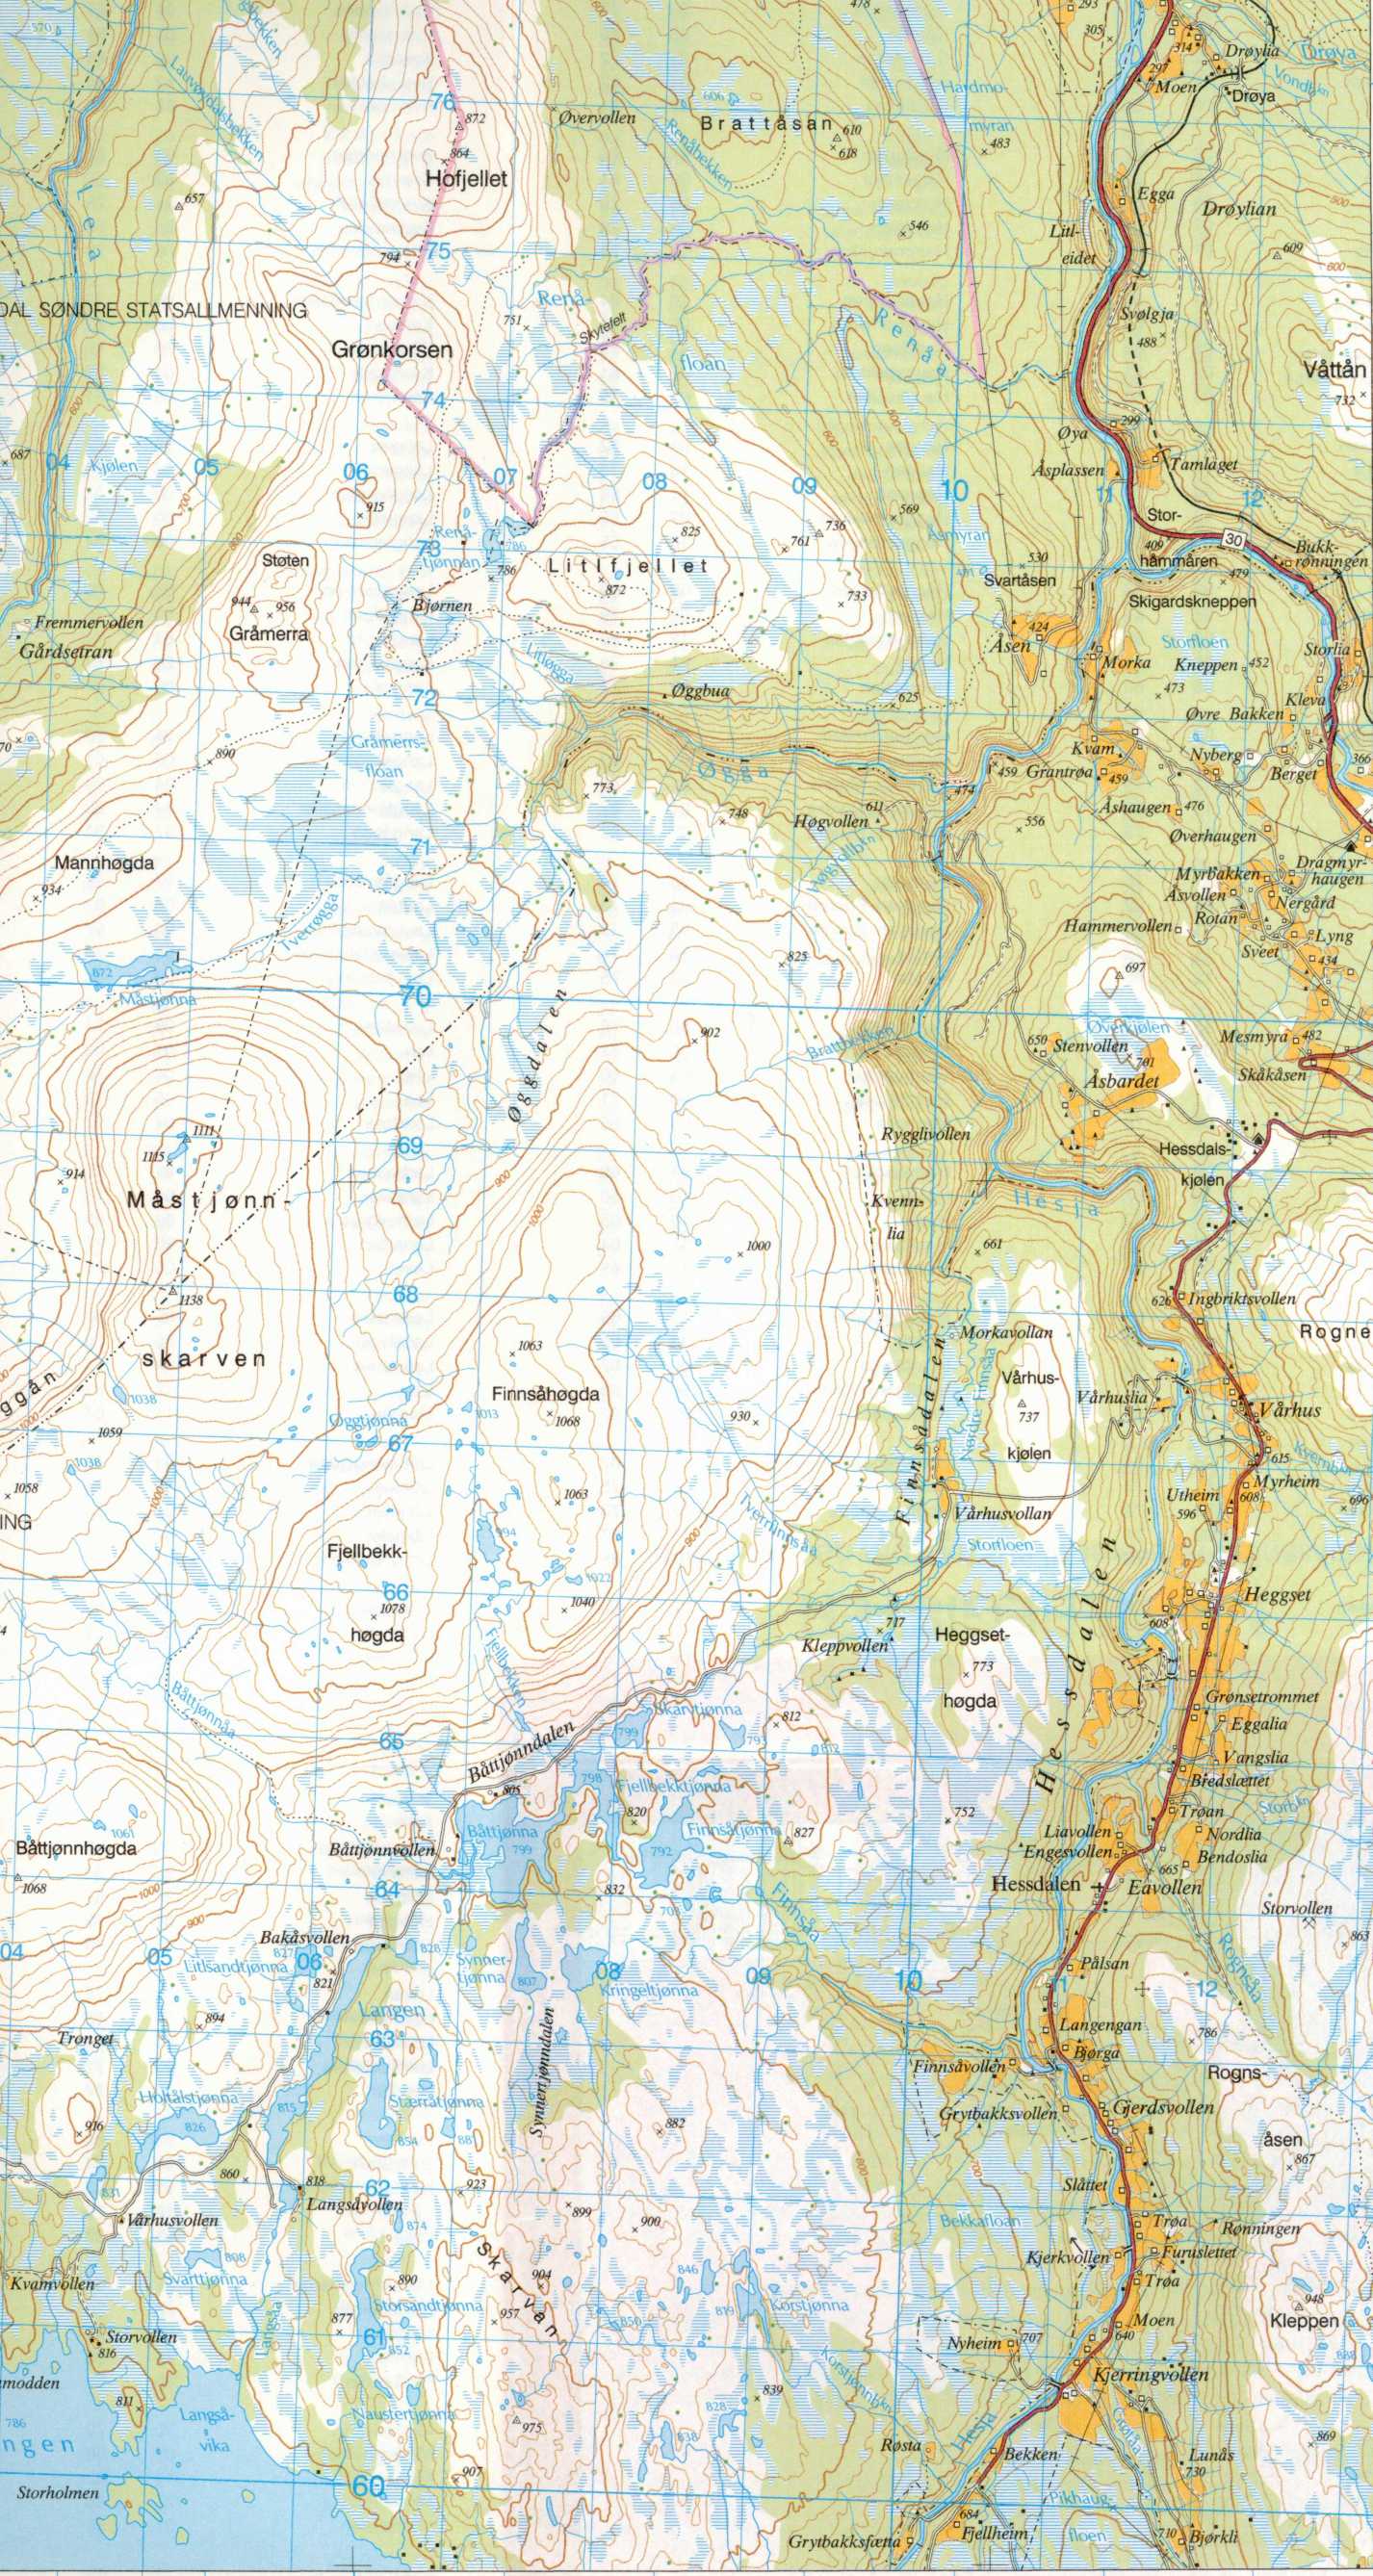 Map of the central part of Hessdalen